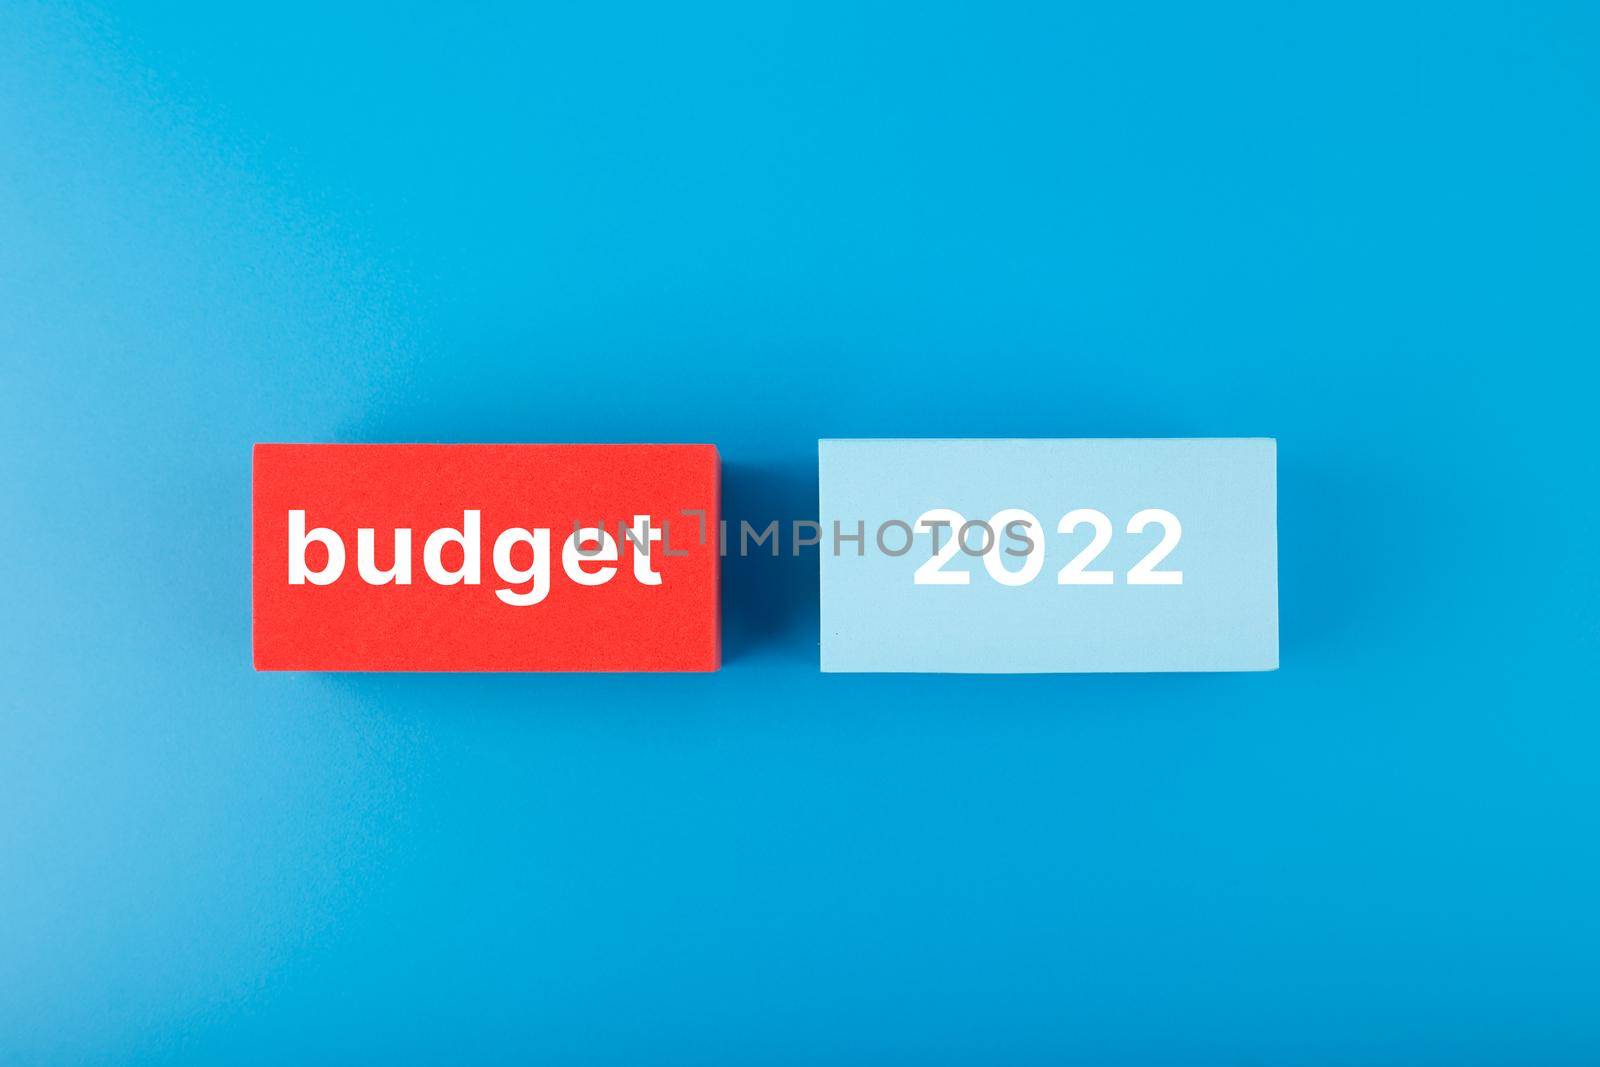 Business plan or budget concept 2022. Text budget 2022 written on red and blue rectangles on dark blue background by Senorina_Irina